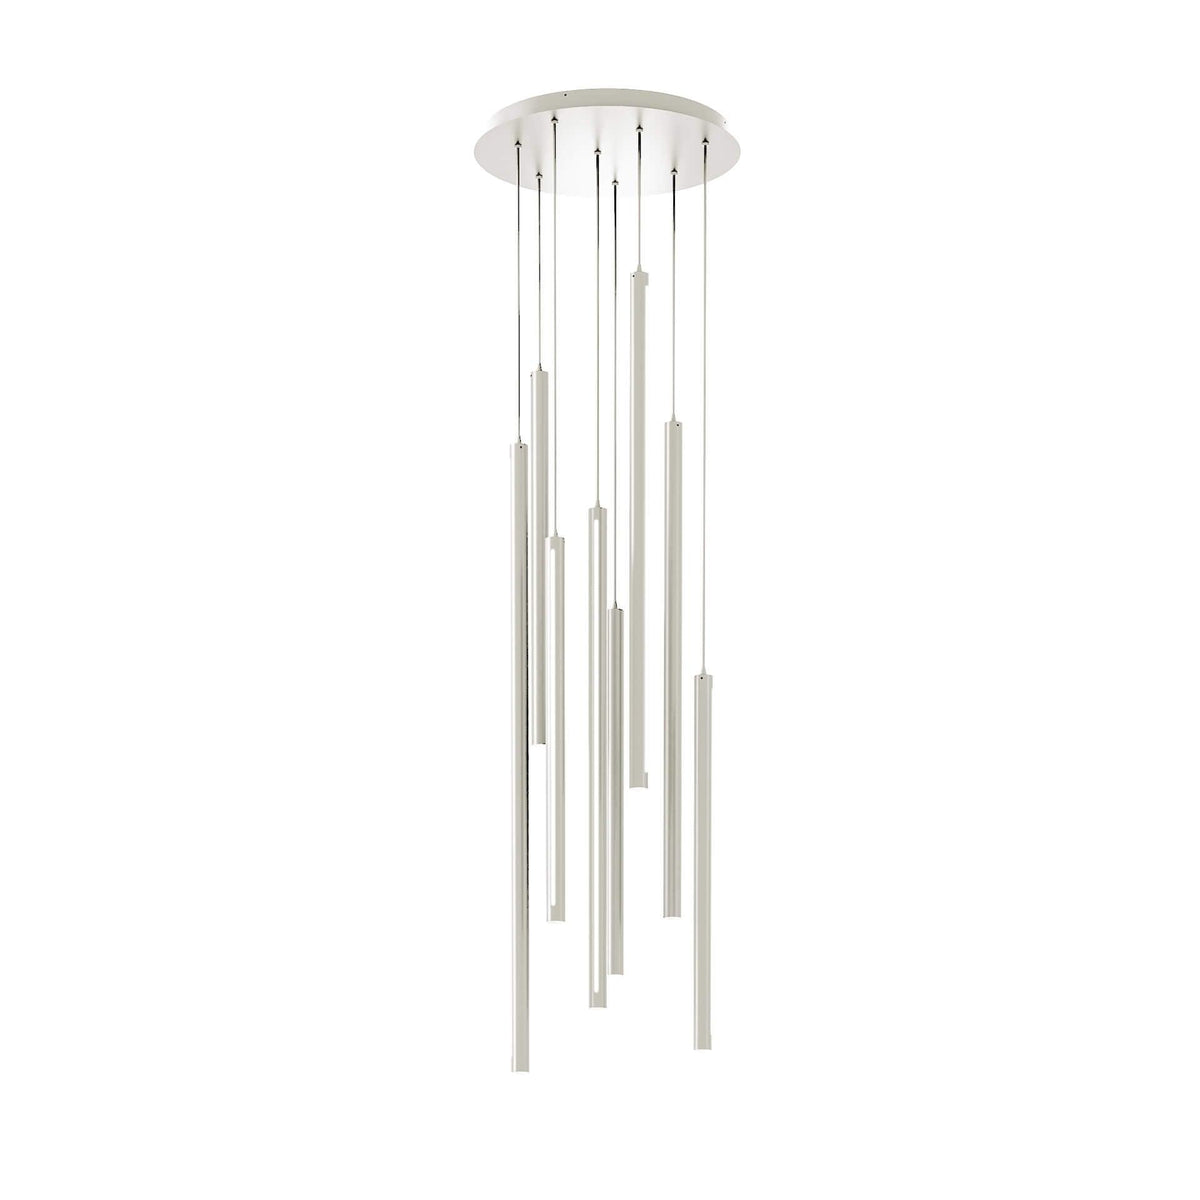 Dals Lighting - PDLED Round CCT LED Duo-Light Cylinder Pendant Cluster - PDLED120-8-WH | Montreal Lighting & Hardware